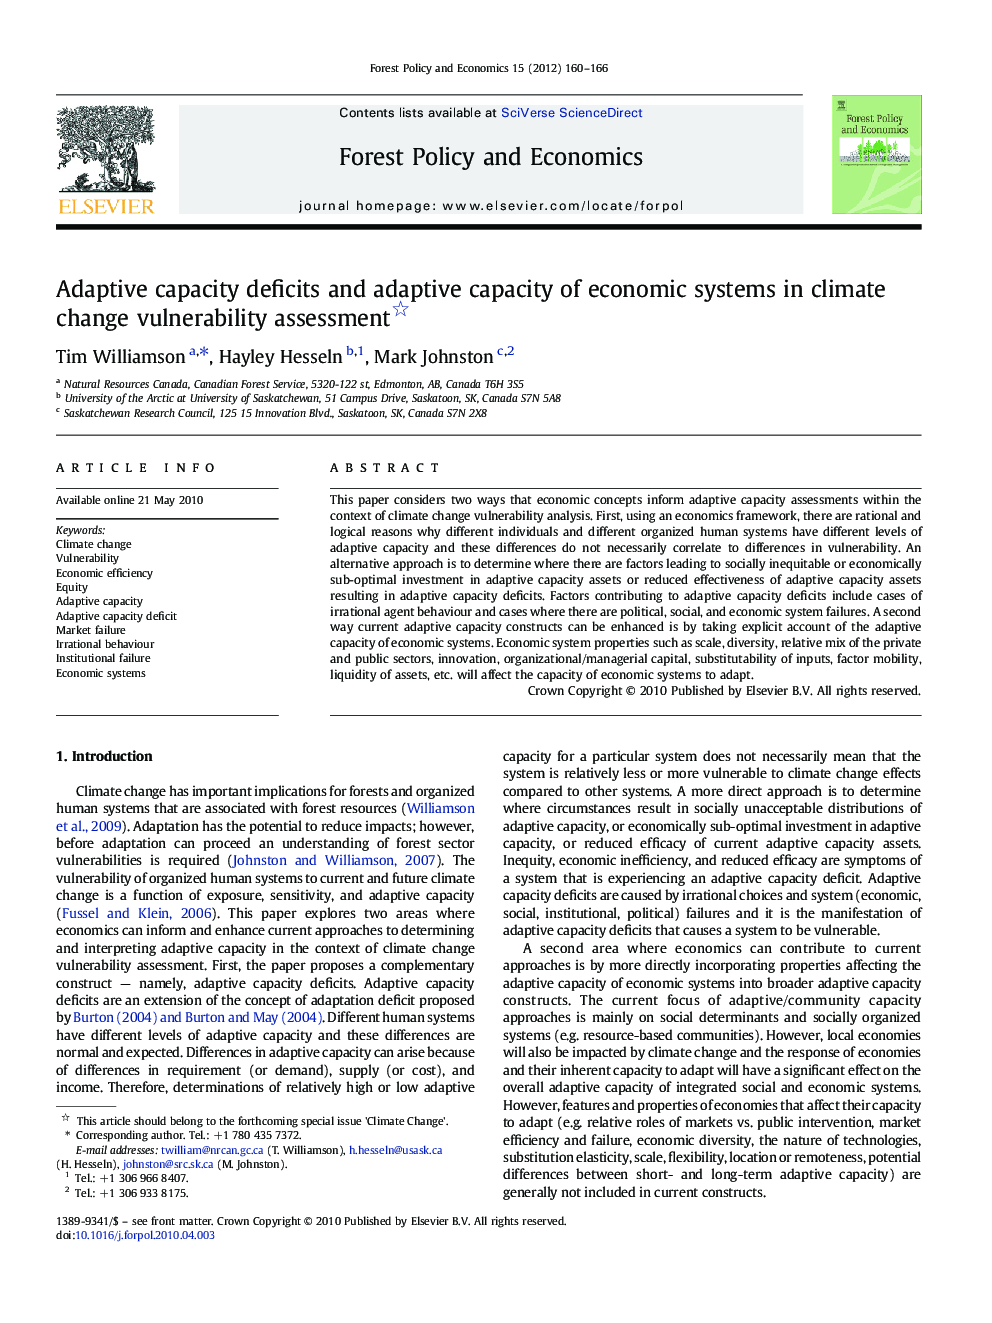 Adaptive capacity deficits and adaptive capacity of economic systems in climate change vulnerability assessment 